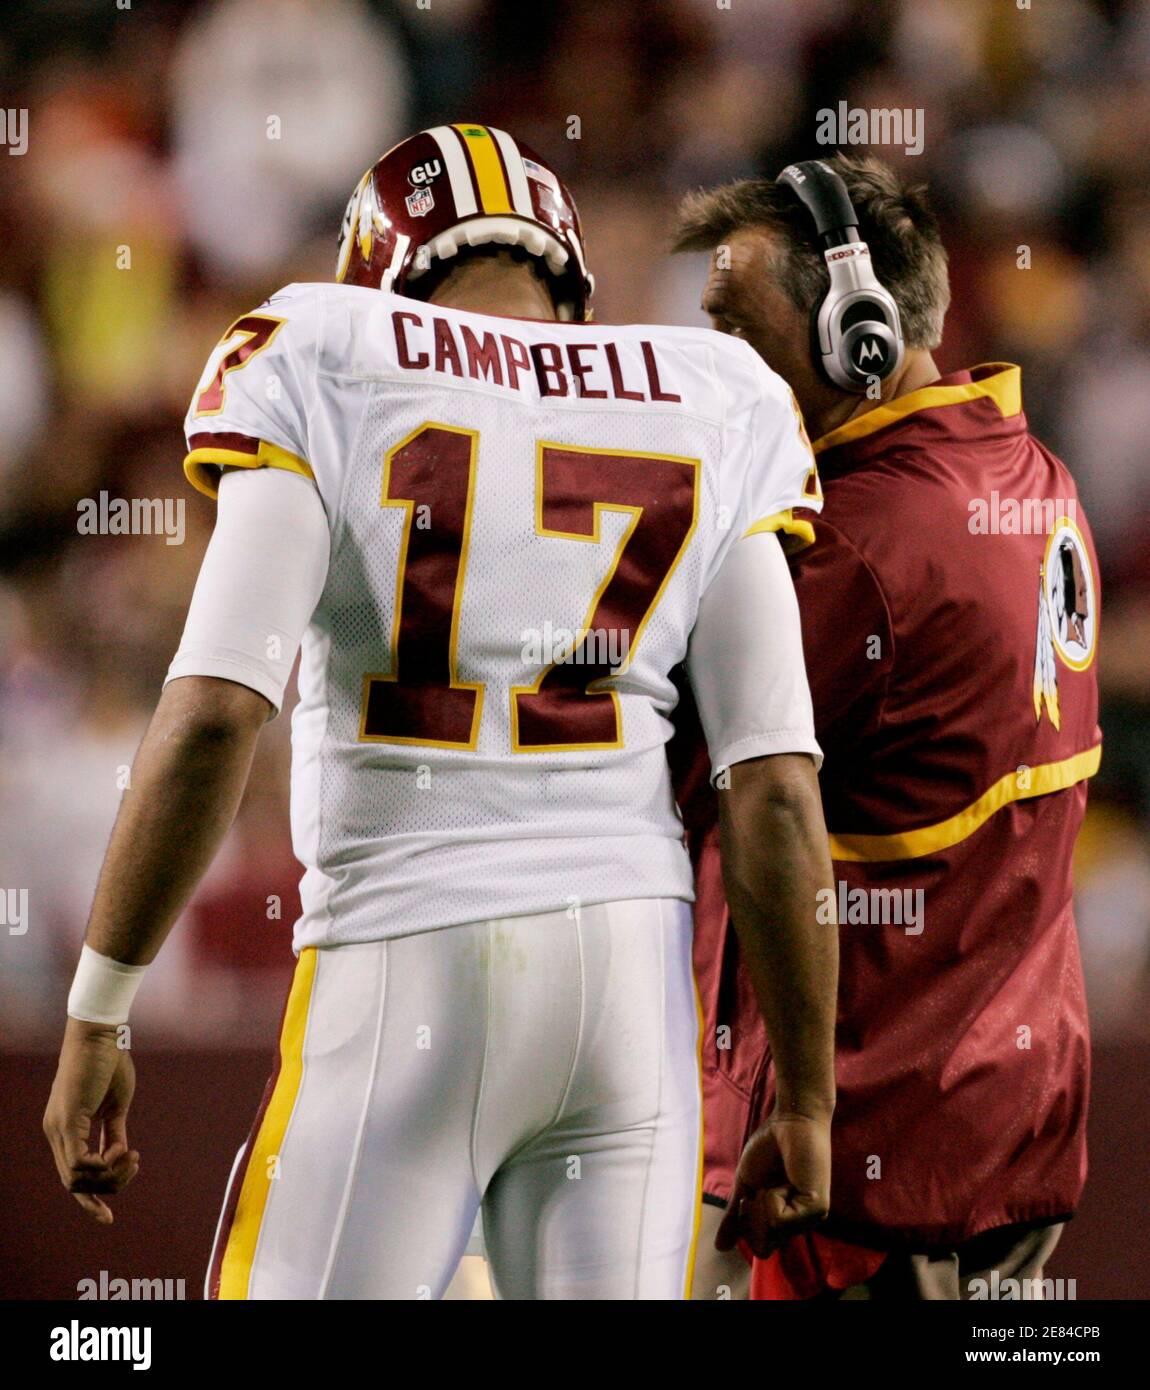 Washington Redskins head coach Jim Zorn (R) confers with quarterback Jason Campbell in the fourth quarter of their NFL football game against the Cleveland Browns in Landover, Maryland October 19, 2008.  REUTERS/Gary Cameron   (UNITED STATES) Stock Photo